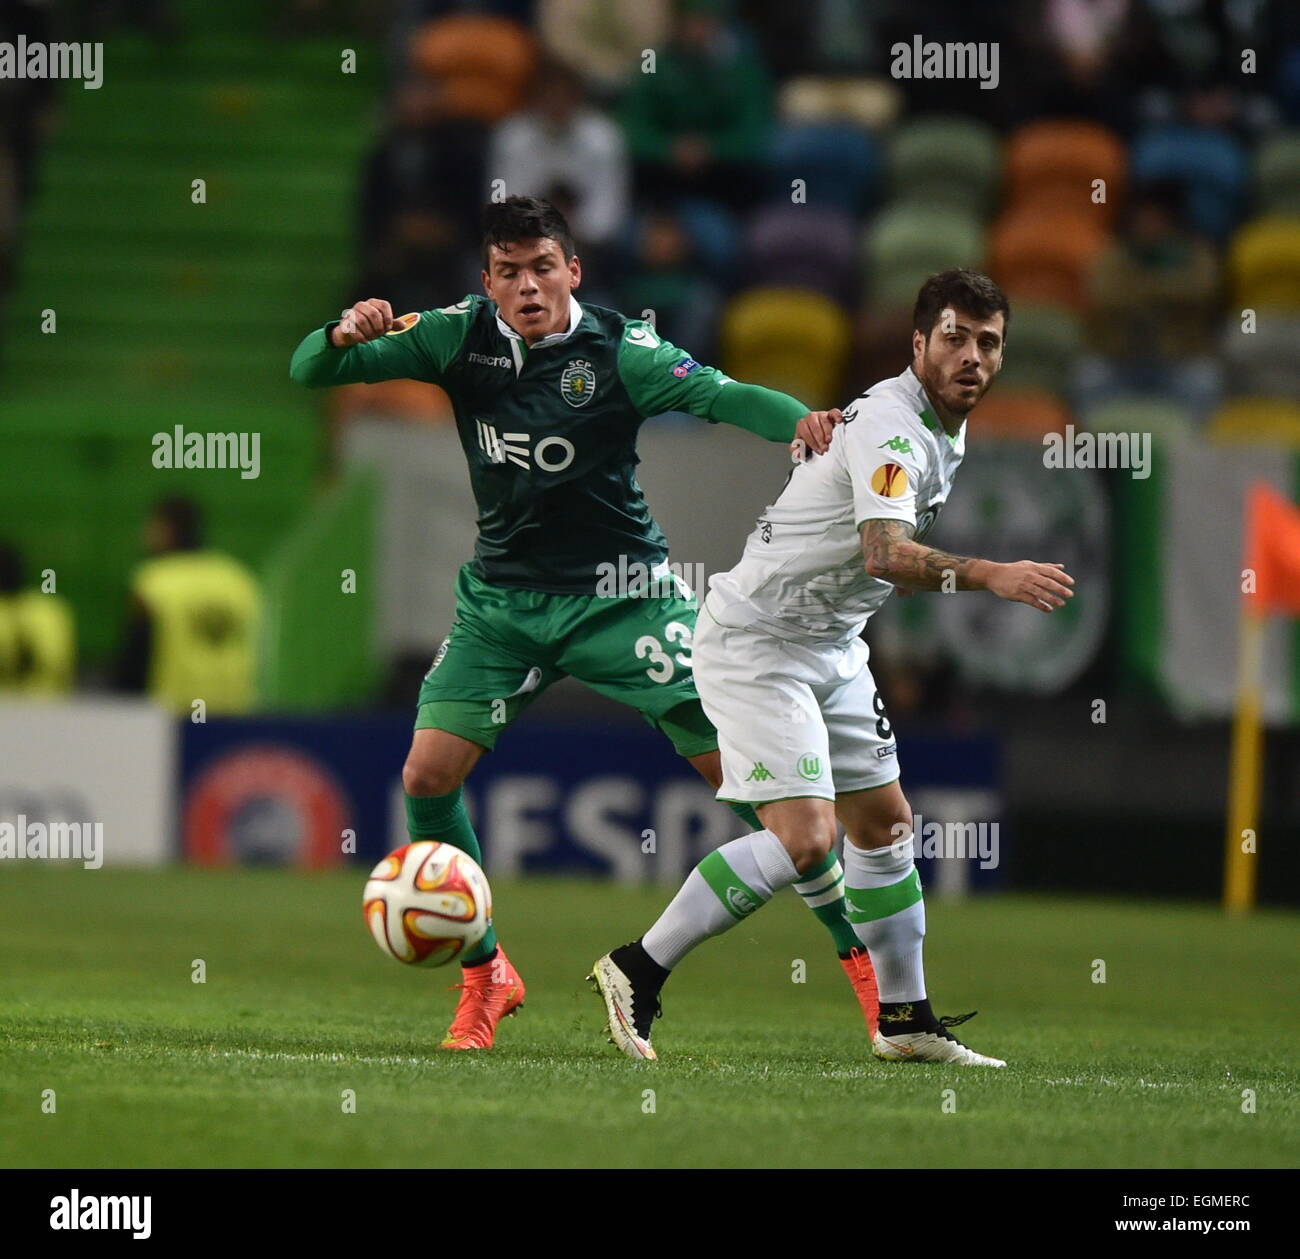 Lisbon. 26th Feb, 2015. Sporting's Jonathan Silva (L) vies for the ball with Wolfsburg's Vieirinha during the UEFA Europa League round of 32 second leg match between Sporting Clube de Portugal and VfL Wolfsburg at the Jose Alvalade stadium in Lisbon, Portugal on Feb. 26, 2015. Credit:  Zhang Liyun/Xinhua/Alamy Live News Stock Photo